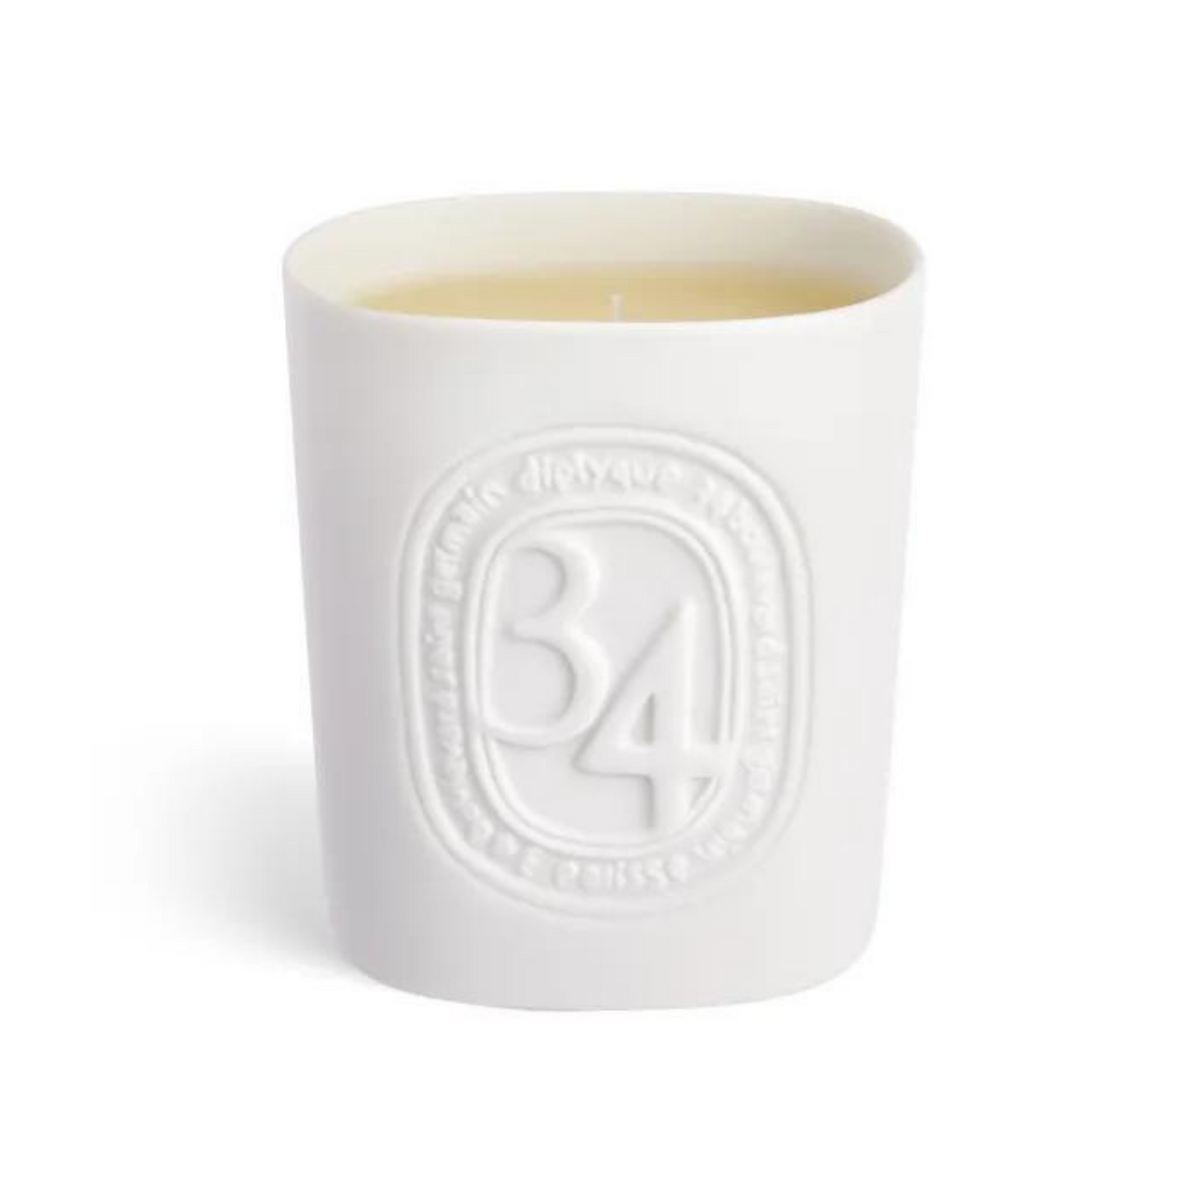 Primary image of 34 Boulevard Saint Germain Candle